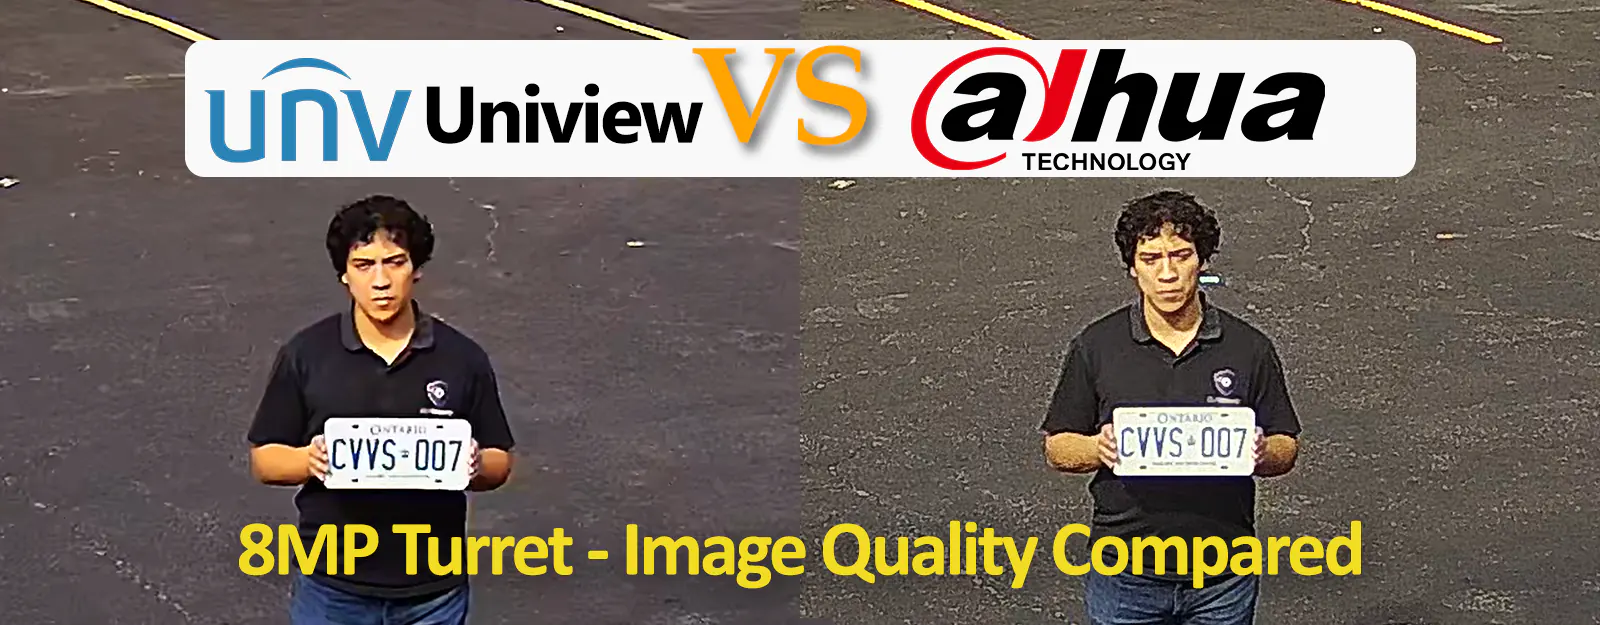 You are currently viewing Dahua vs Uniview 8MP Turret – Image Quality